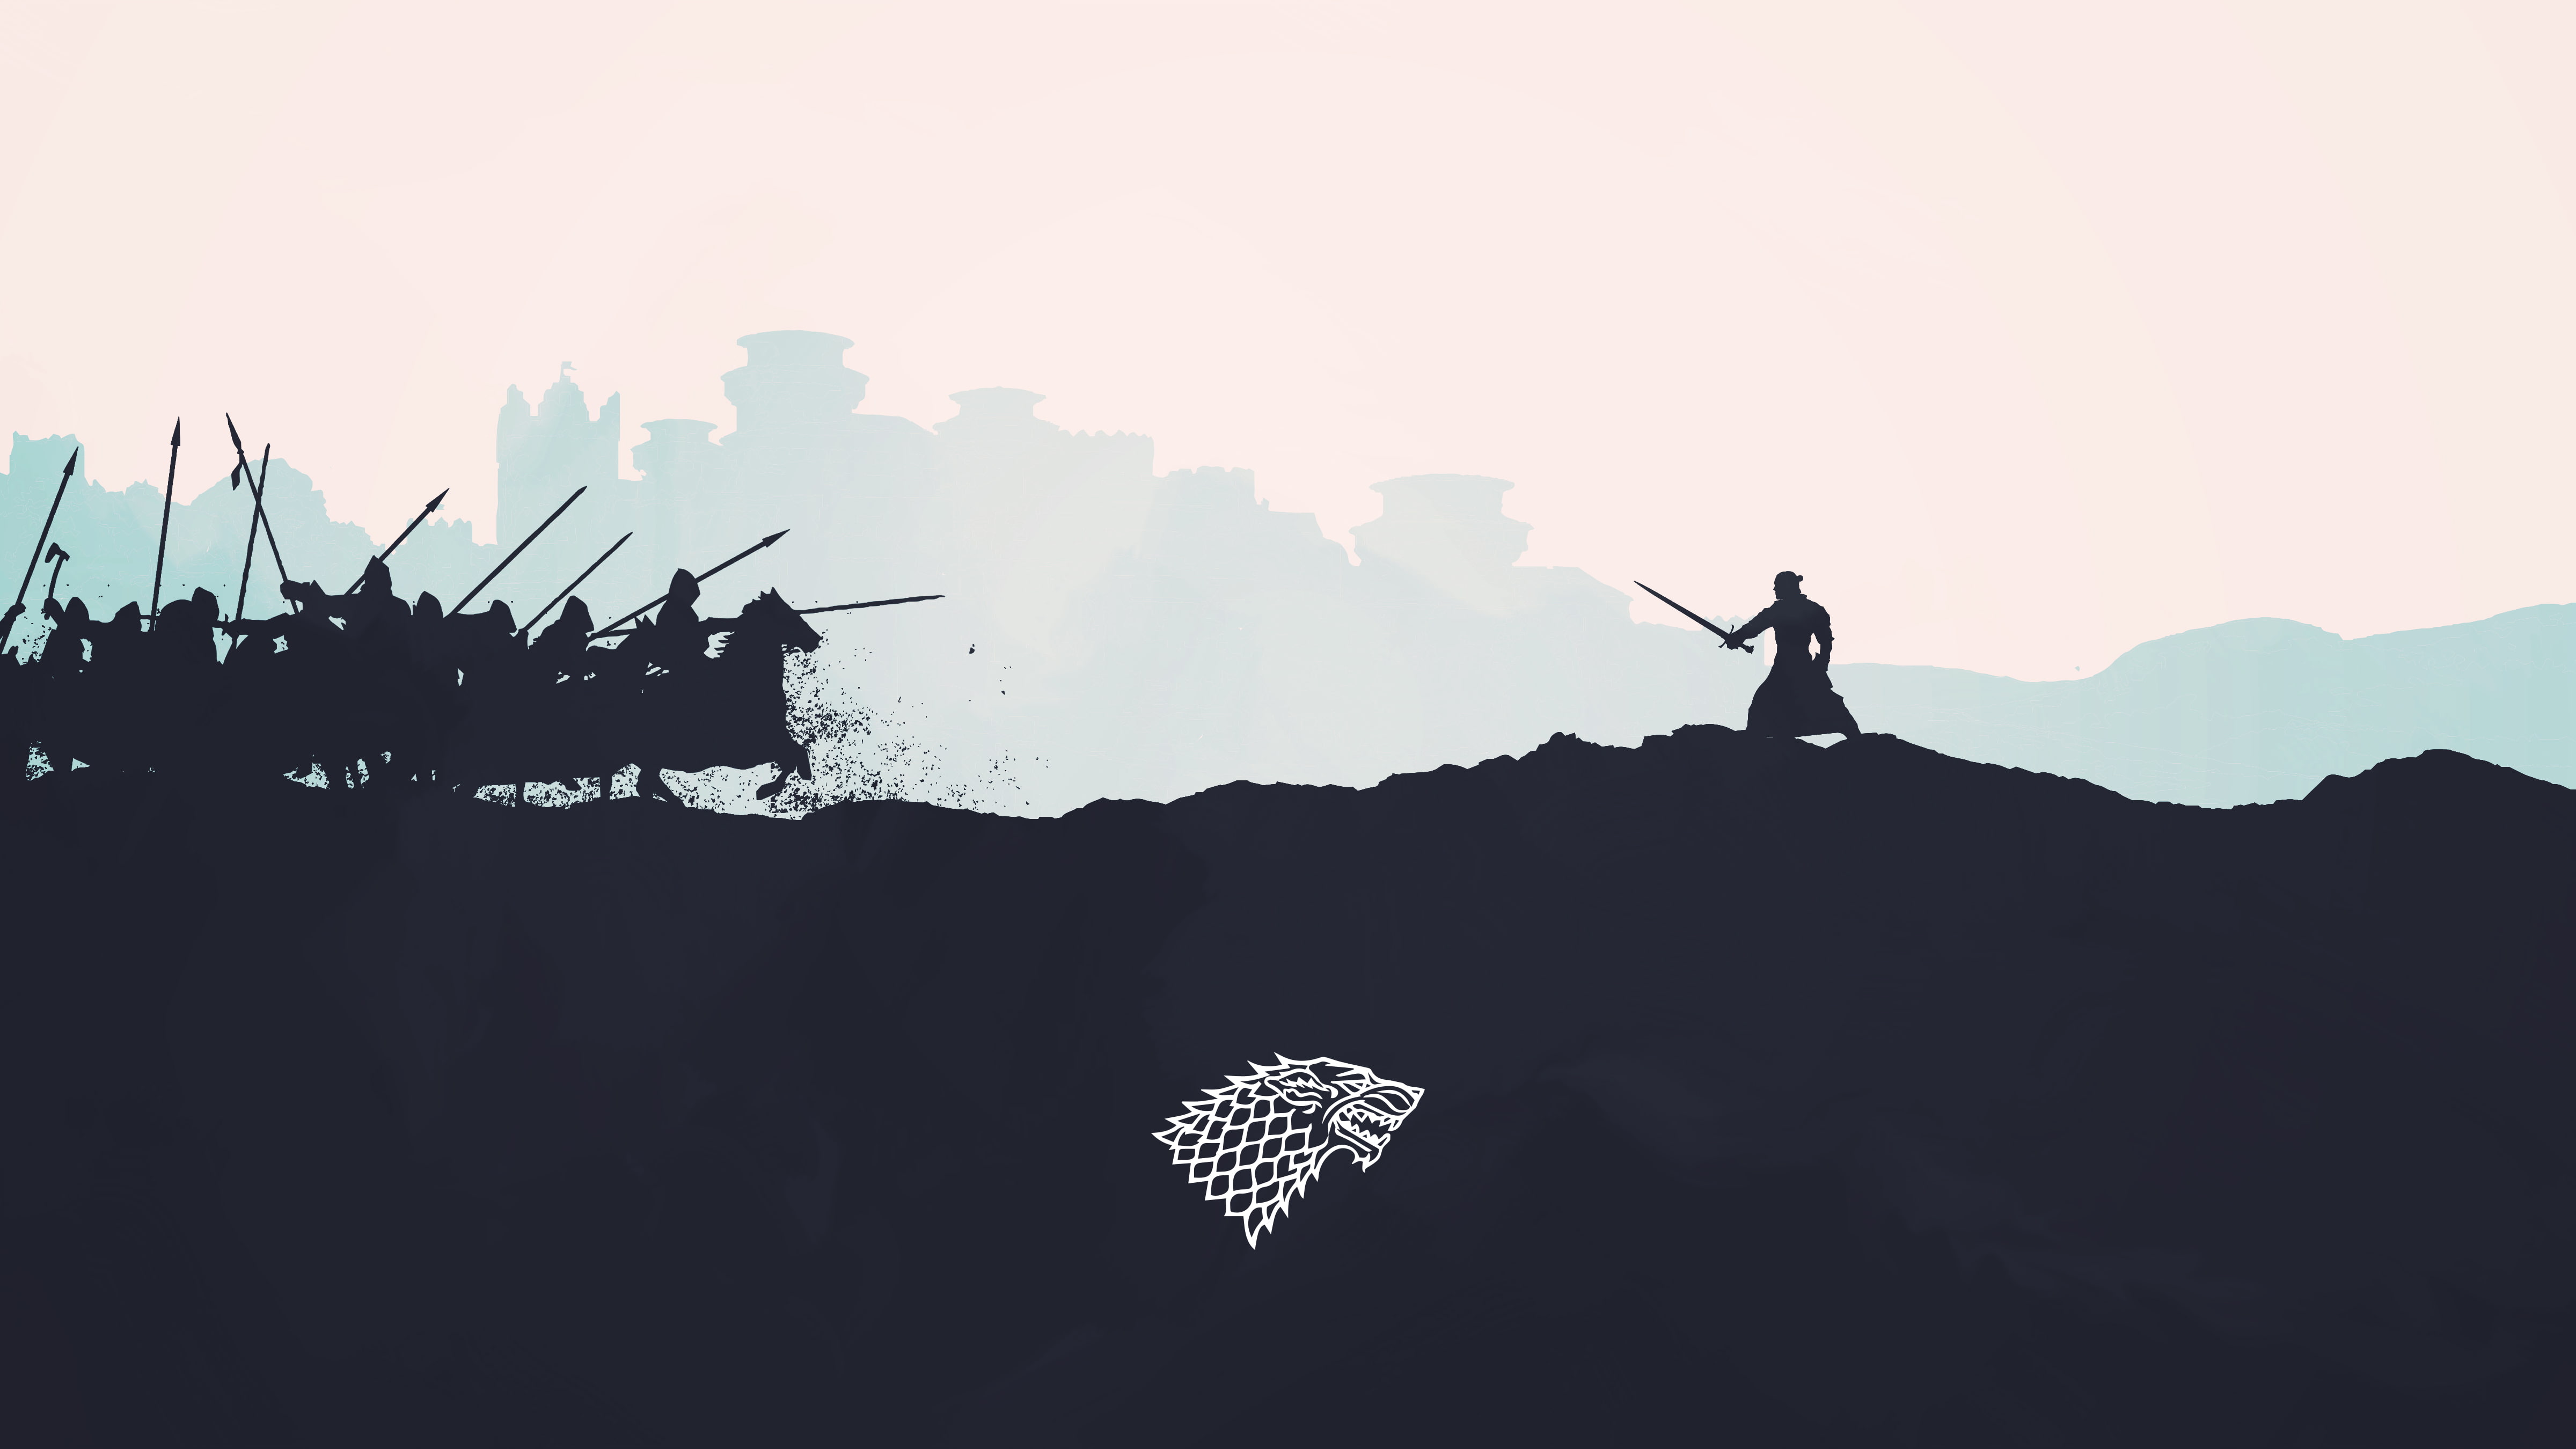 Game Of Thrones Quotes Wallpaper 4k 540x960